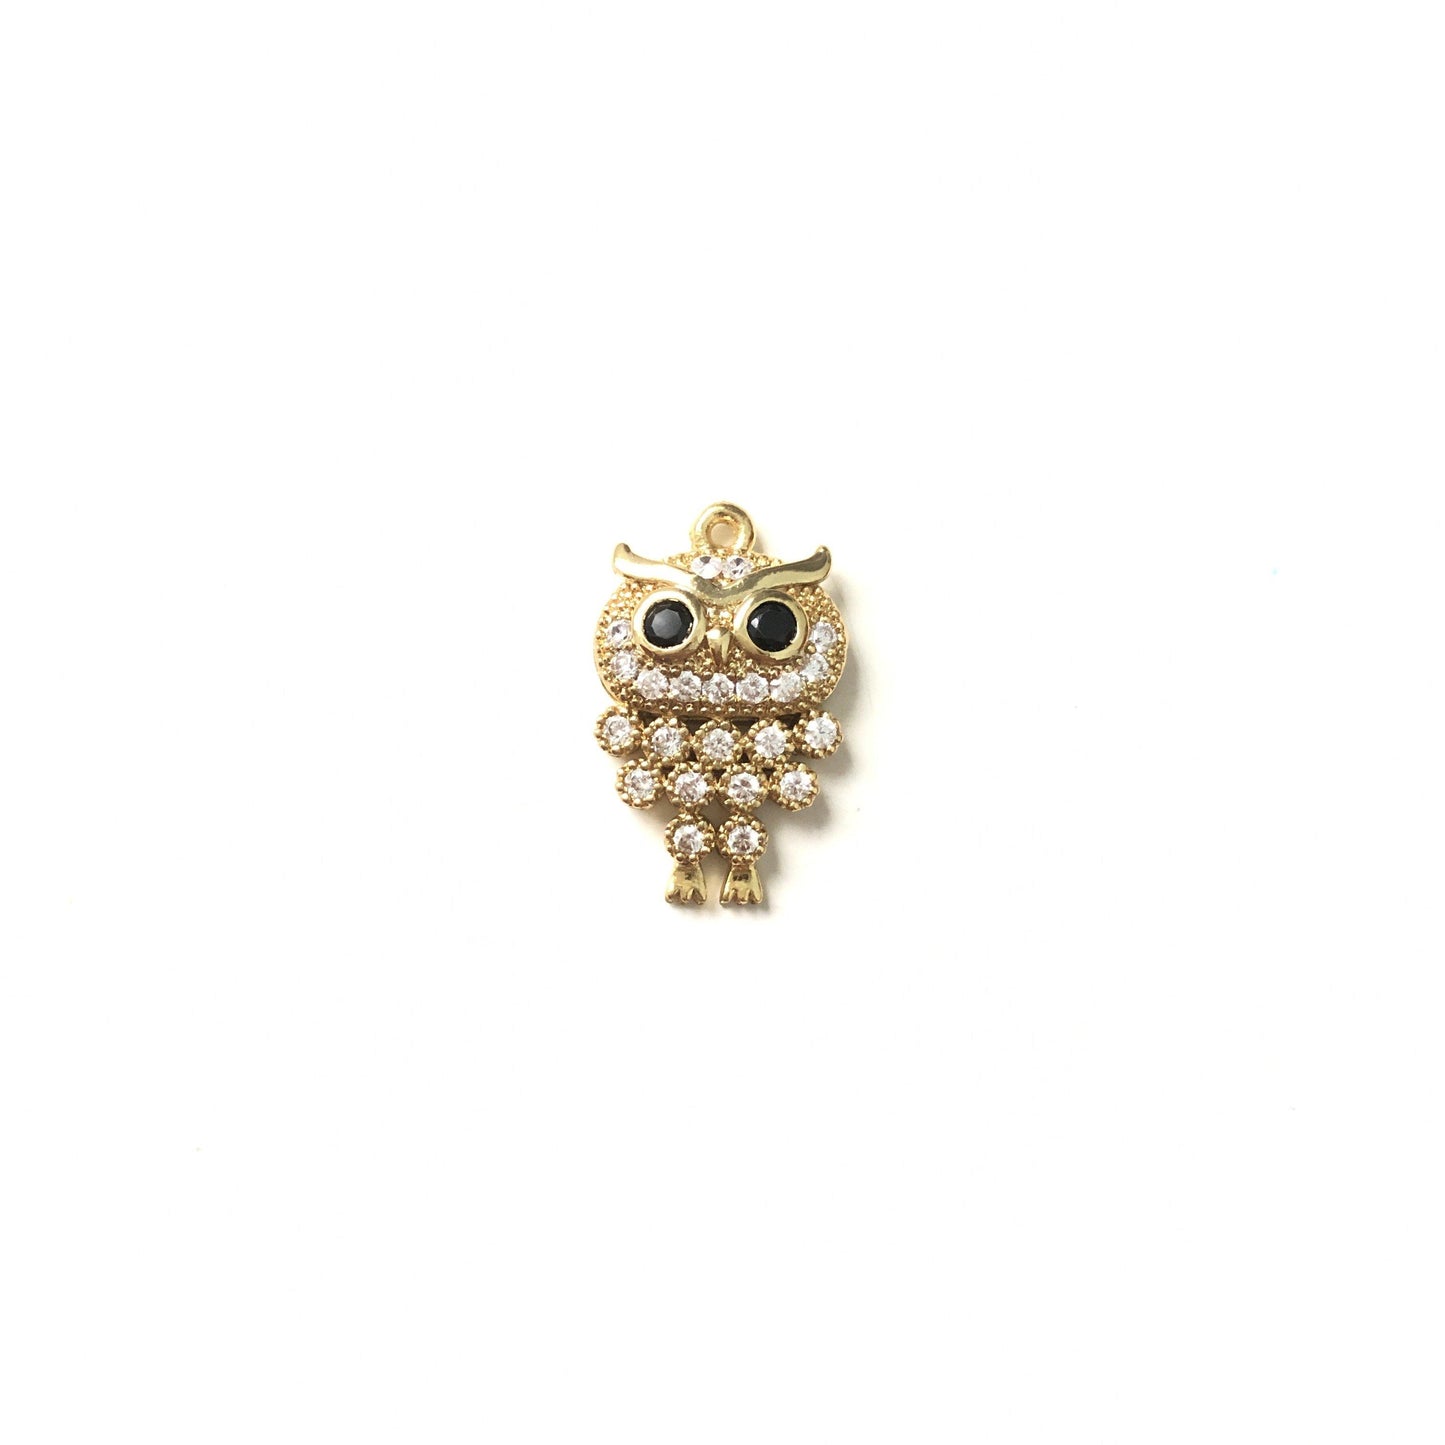 10pcs/lot 19*12mm CZ Paved Owl Charms Gold CZ Paved Charms Animals & Insects Charms Beads Beyond